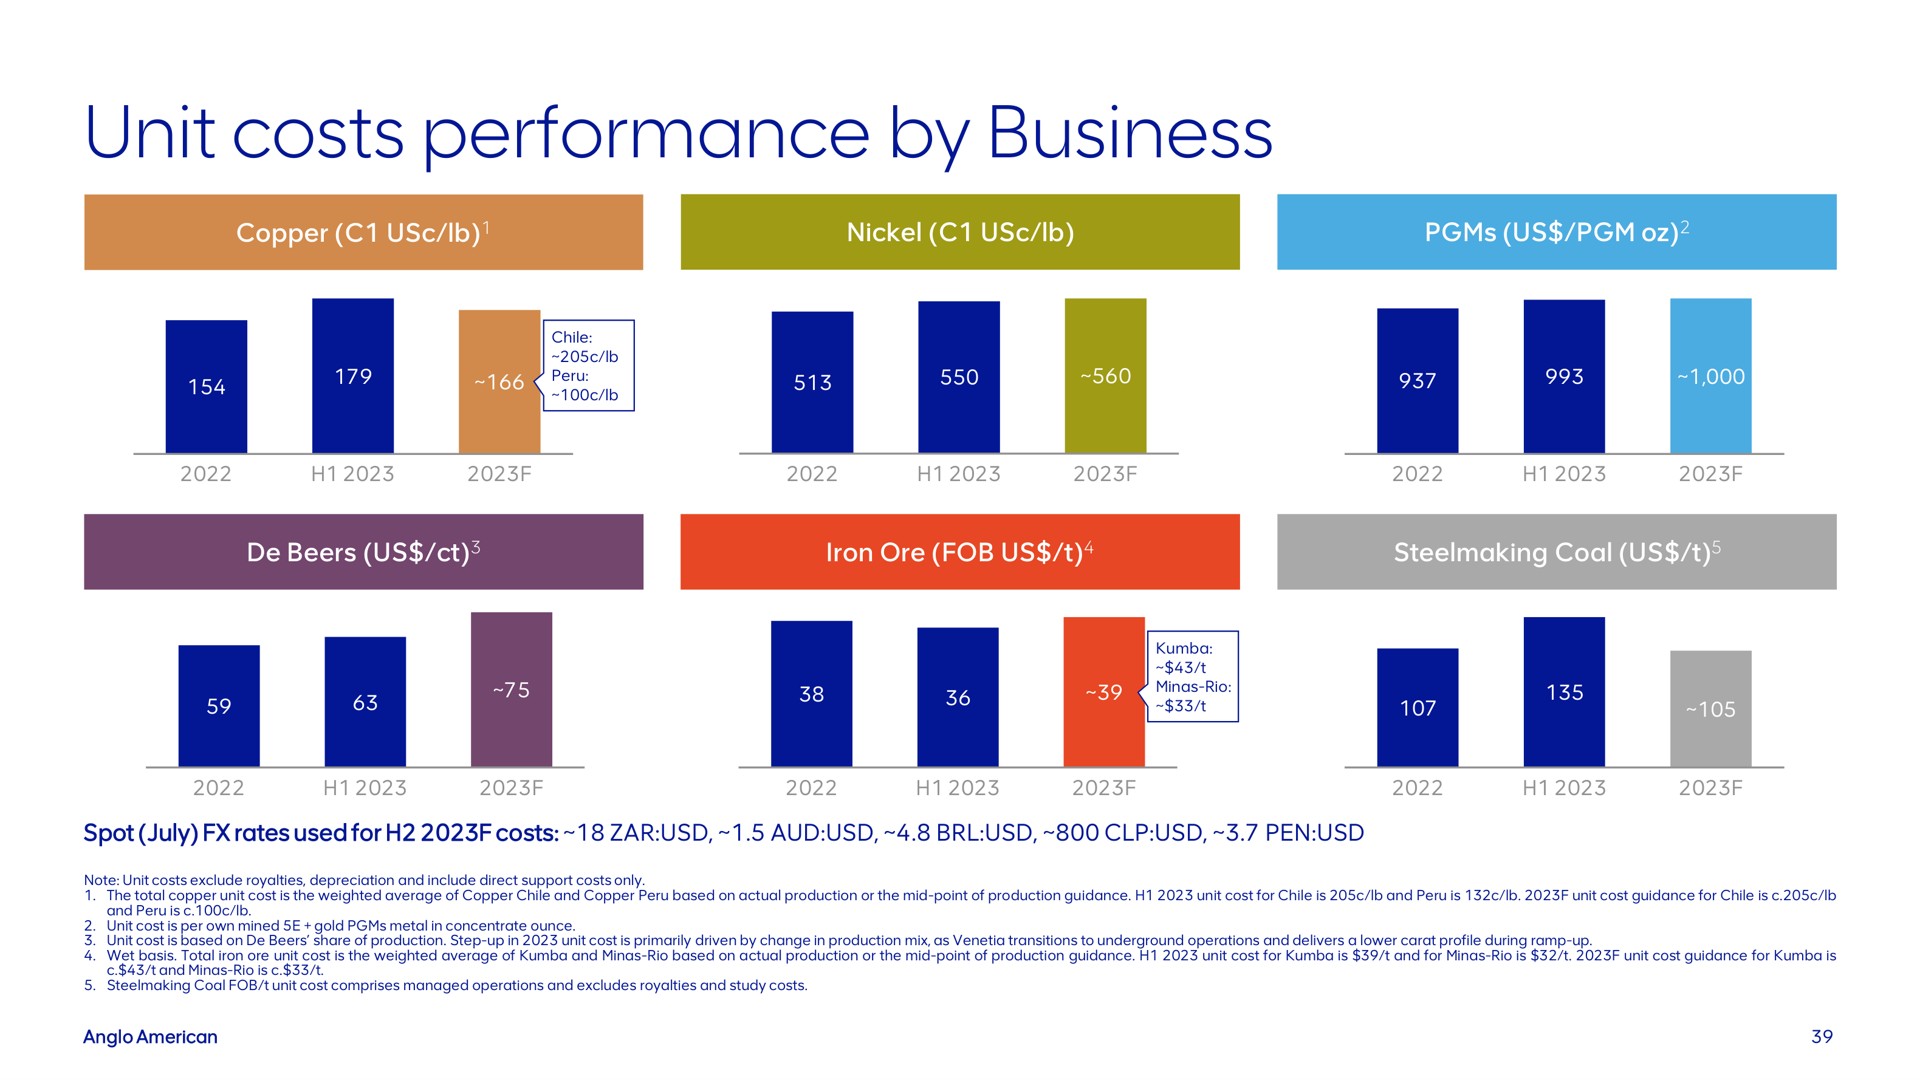 unit costs performance by business | AngloAmerican